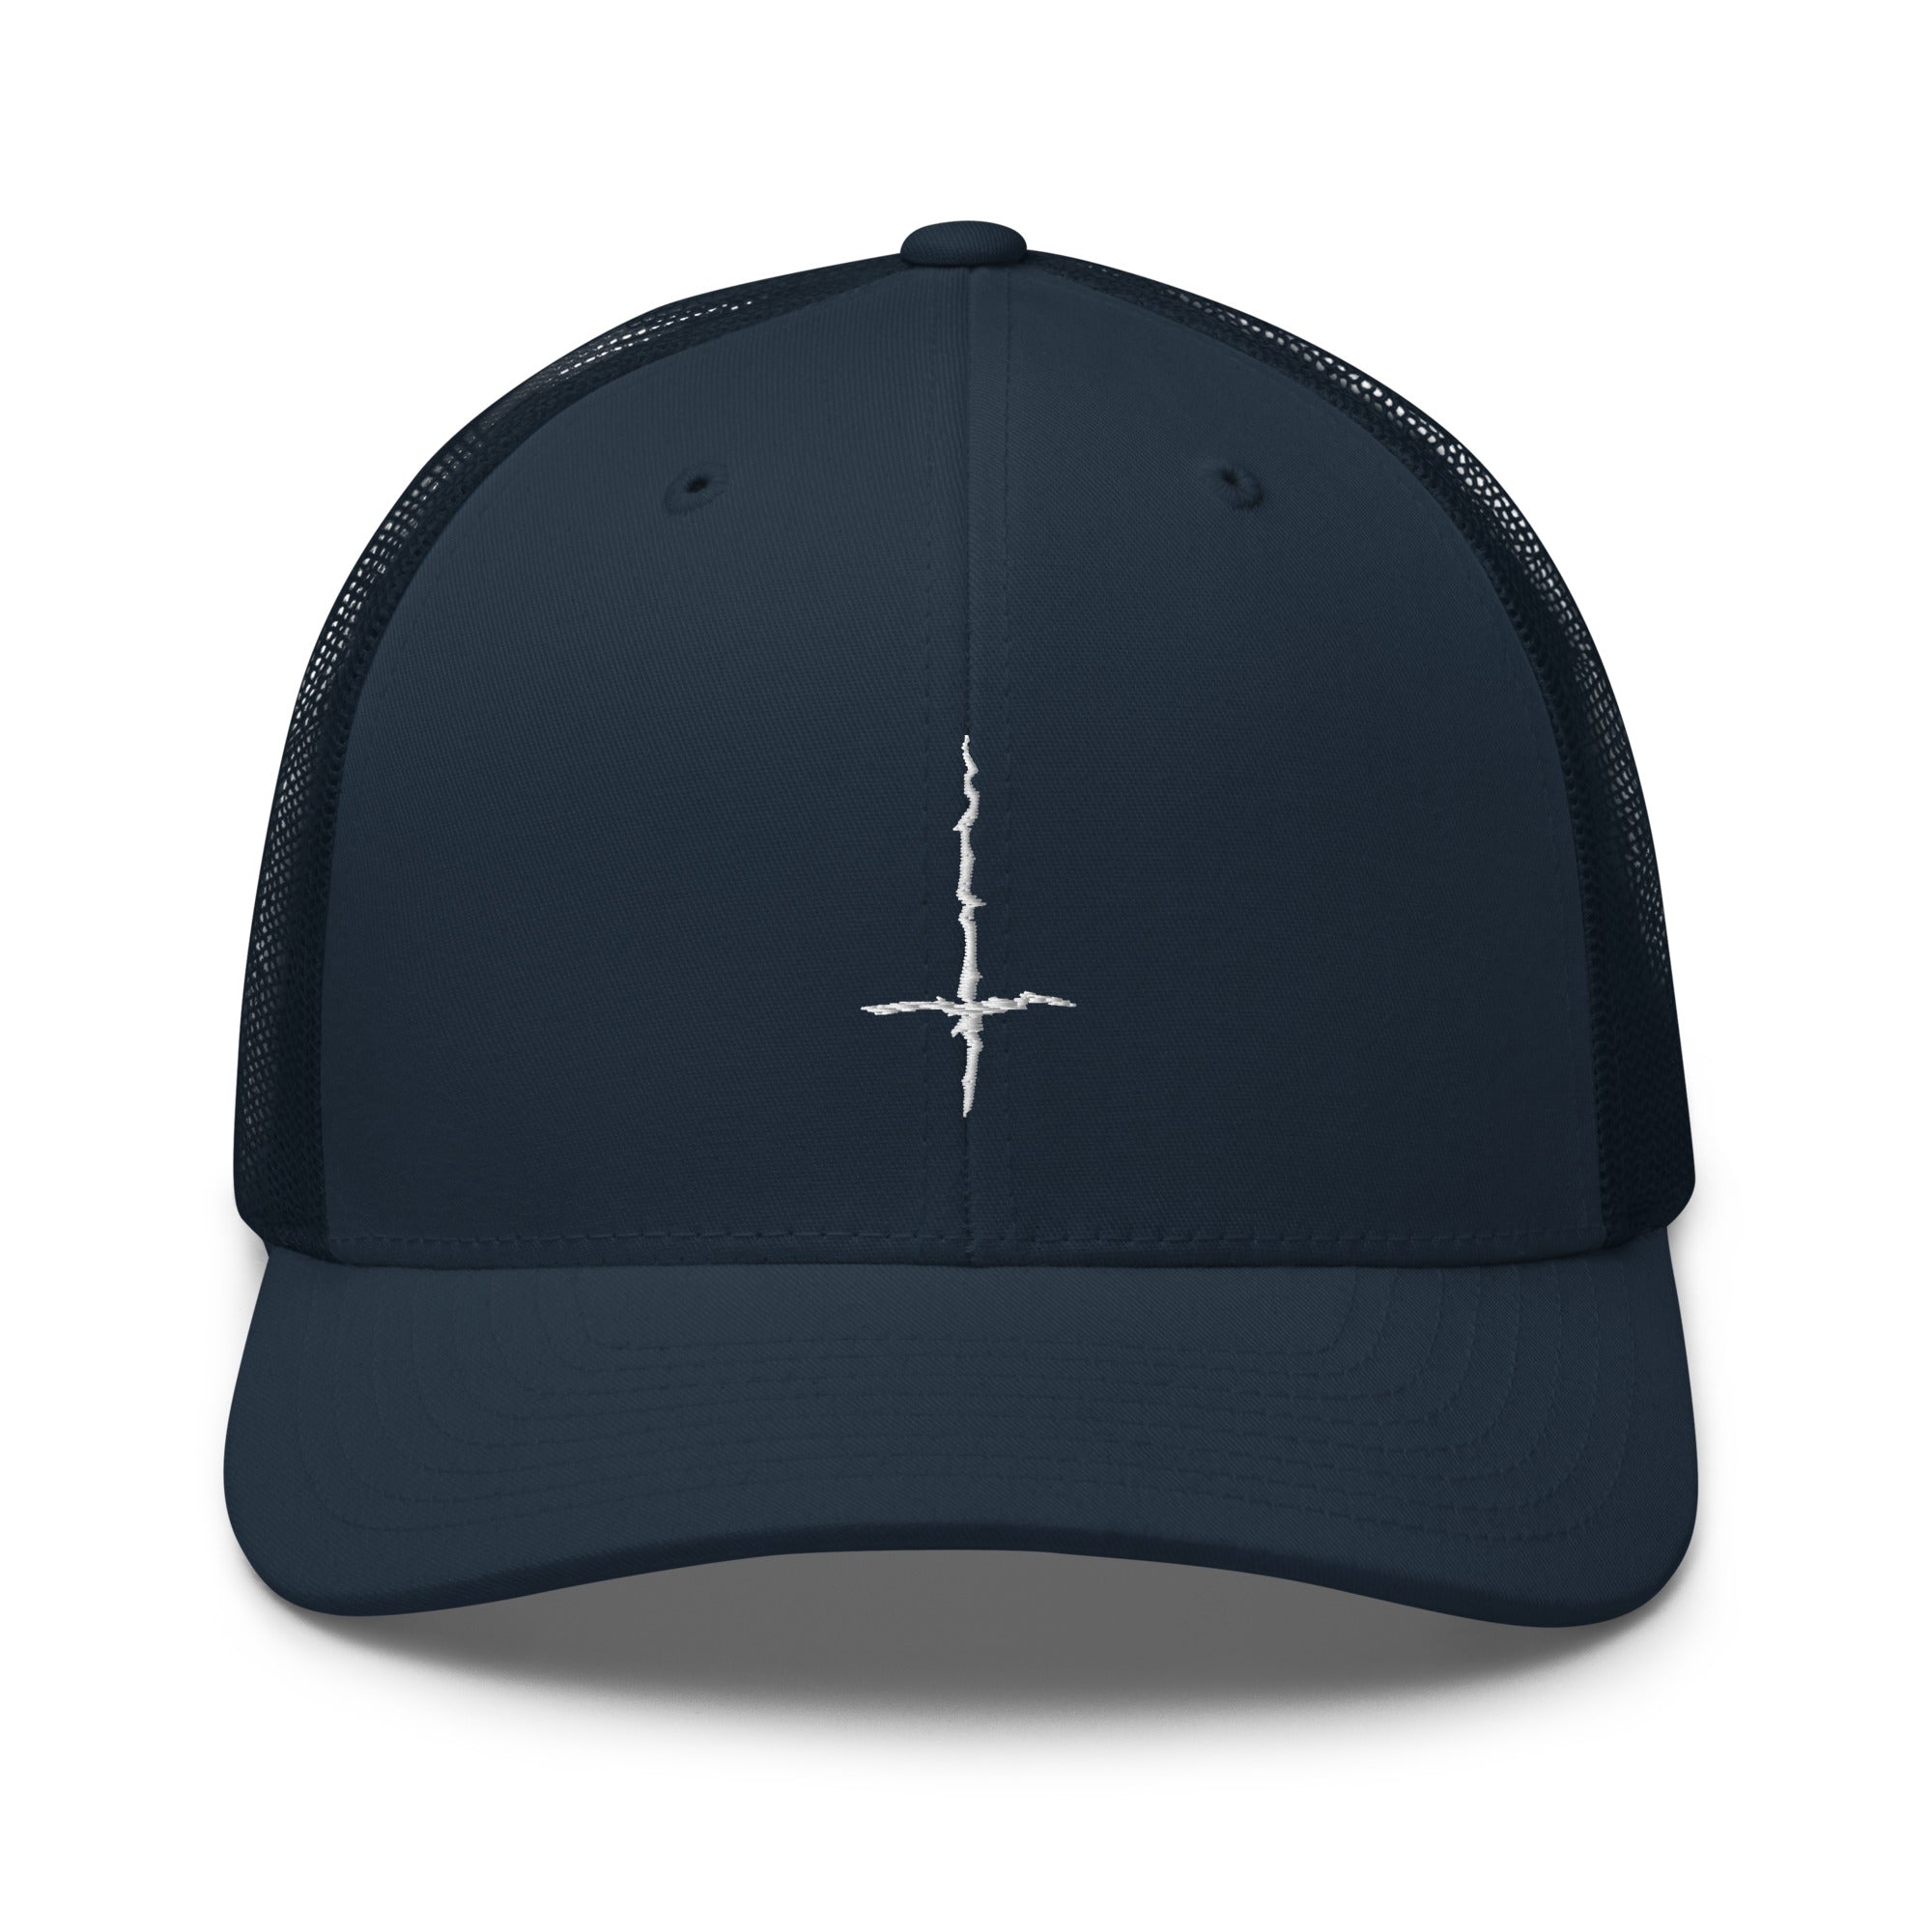 White Inverted Cross Black Metal Style Embroidered Trucker Cap Snapback Hat